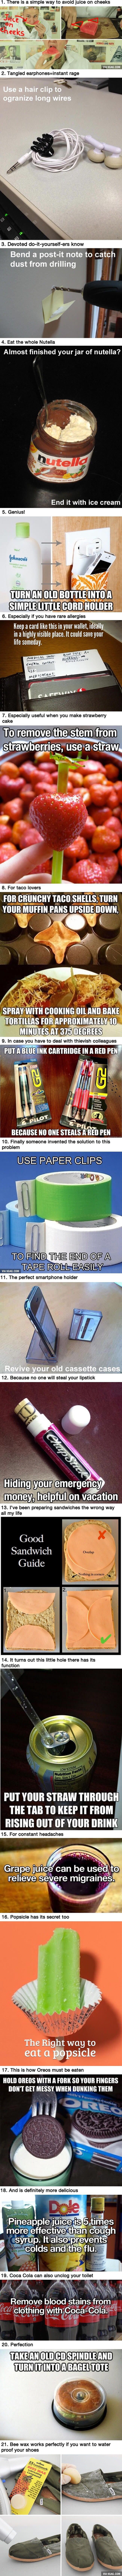 21 Life Hacks That Are Nice To Know!